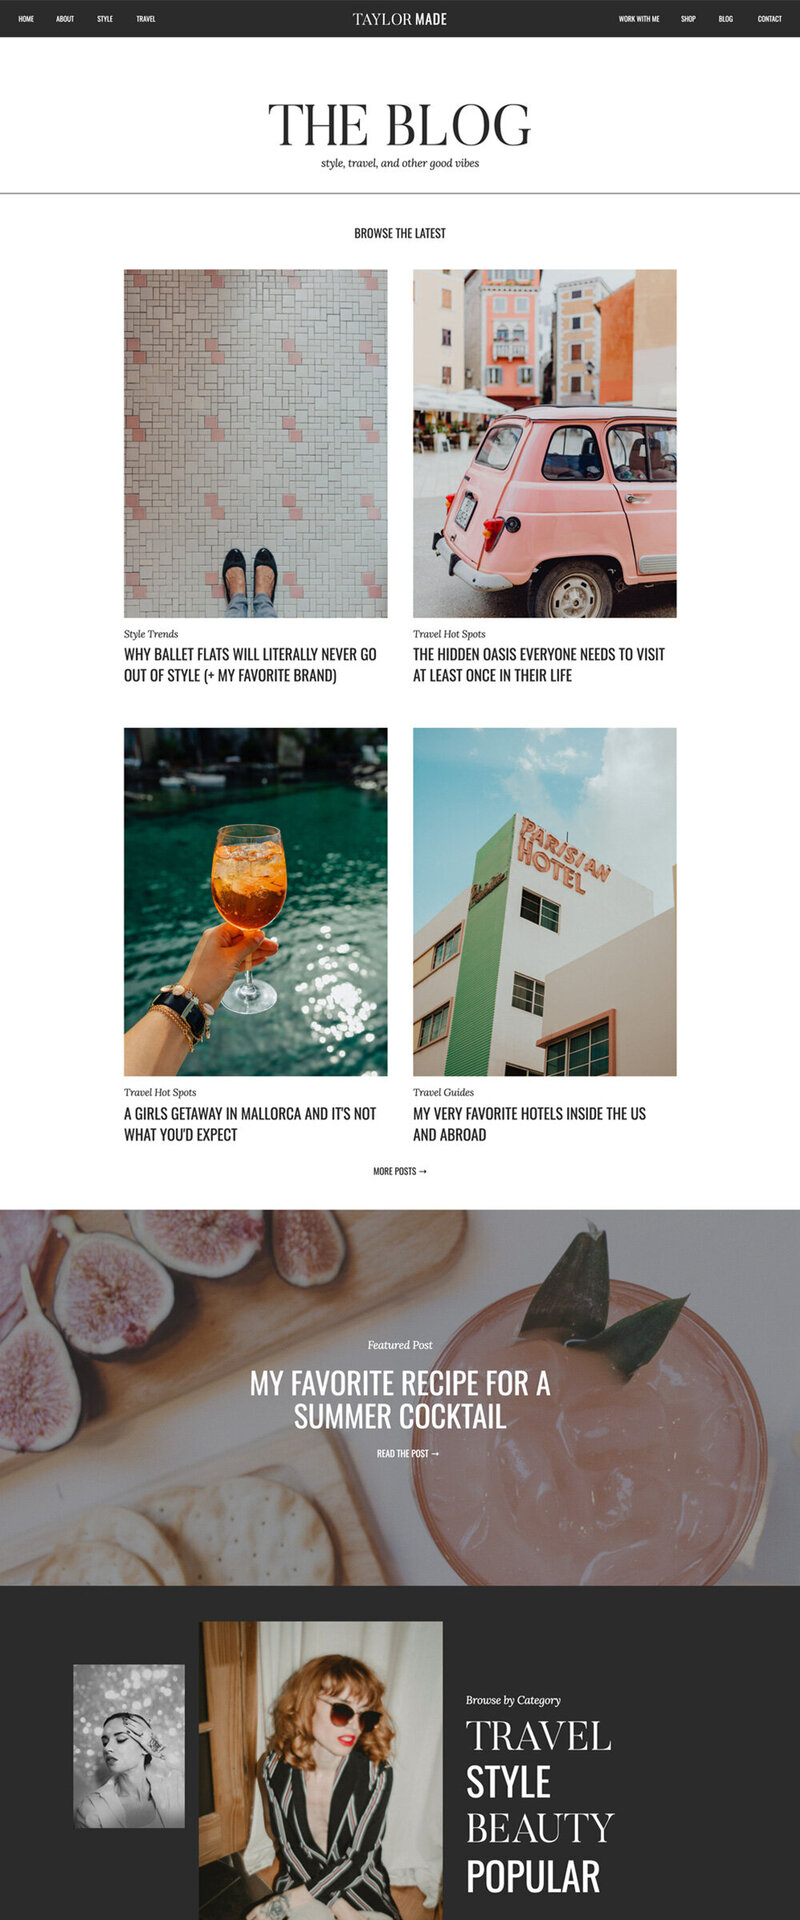 Showit-Website-Template-for-Content-Creators-and-Bloggers_Taylor-Made_Blog-Cropped